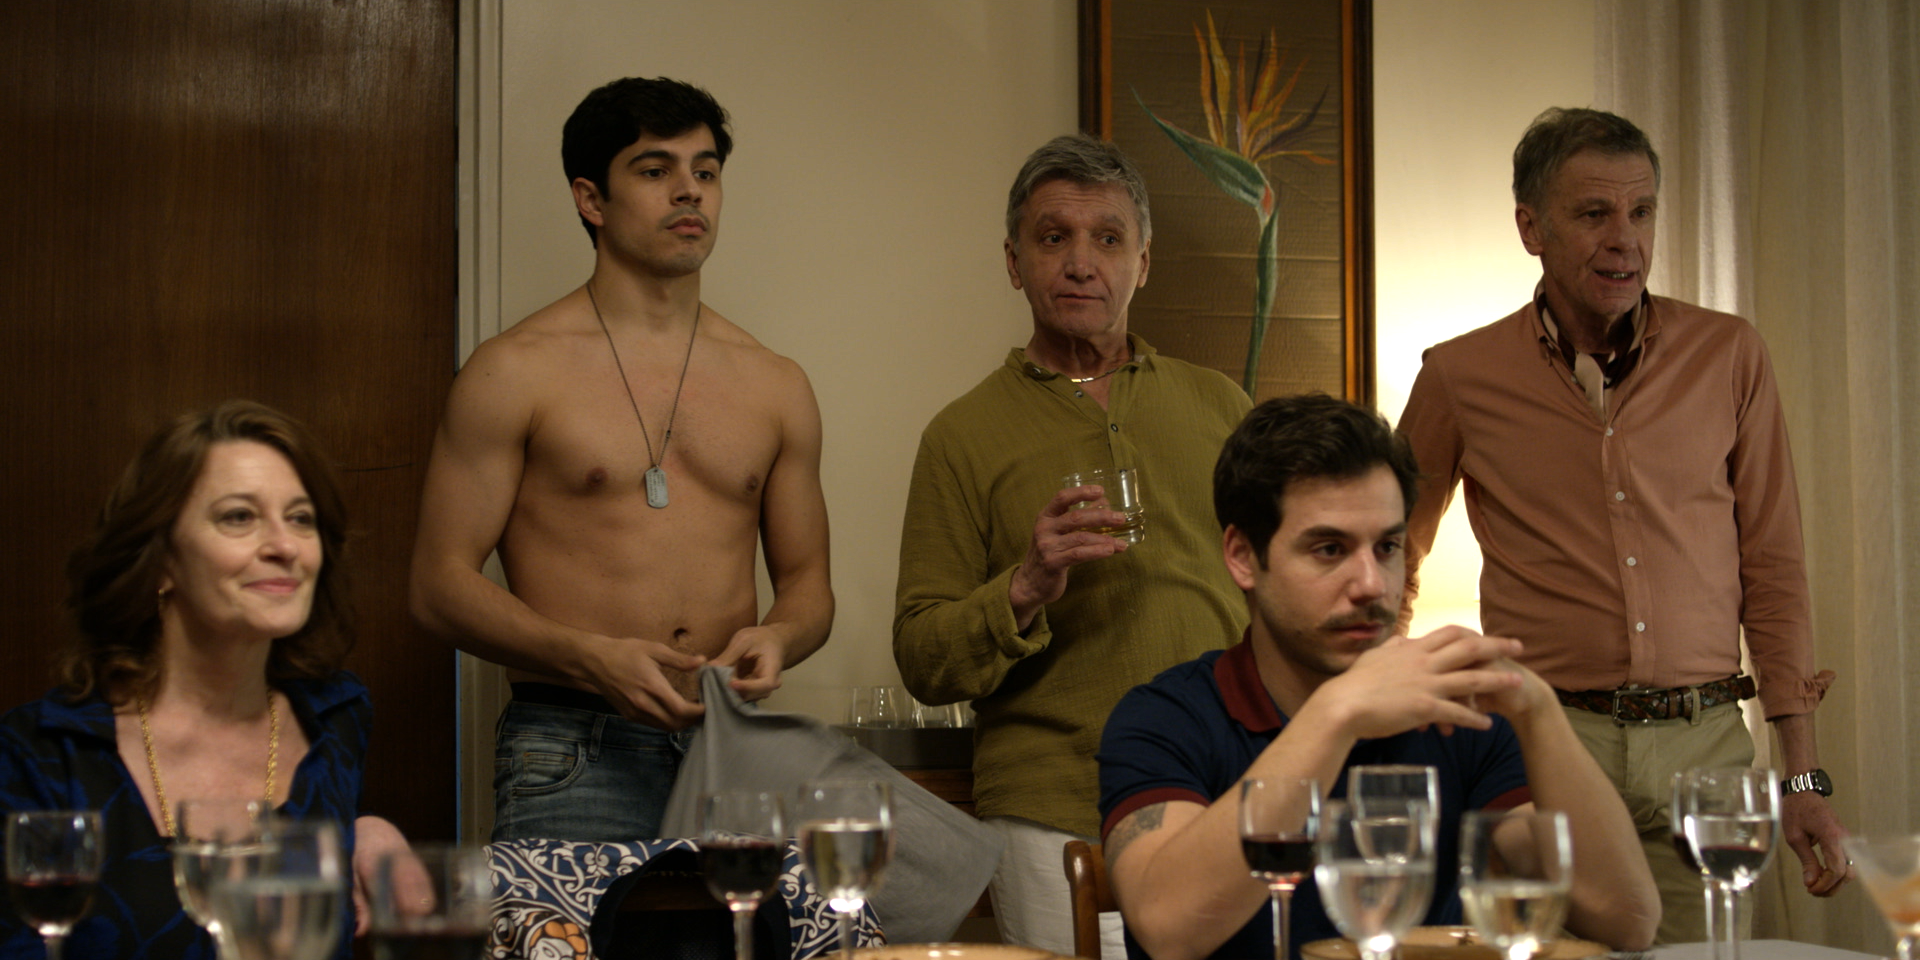 A man and woman sit at a dinner table while behind them stands a young shirtless man and two older, well-dressed men